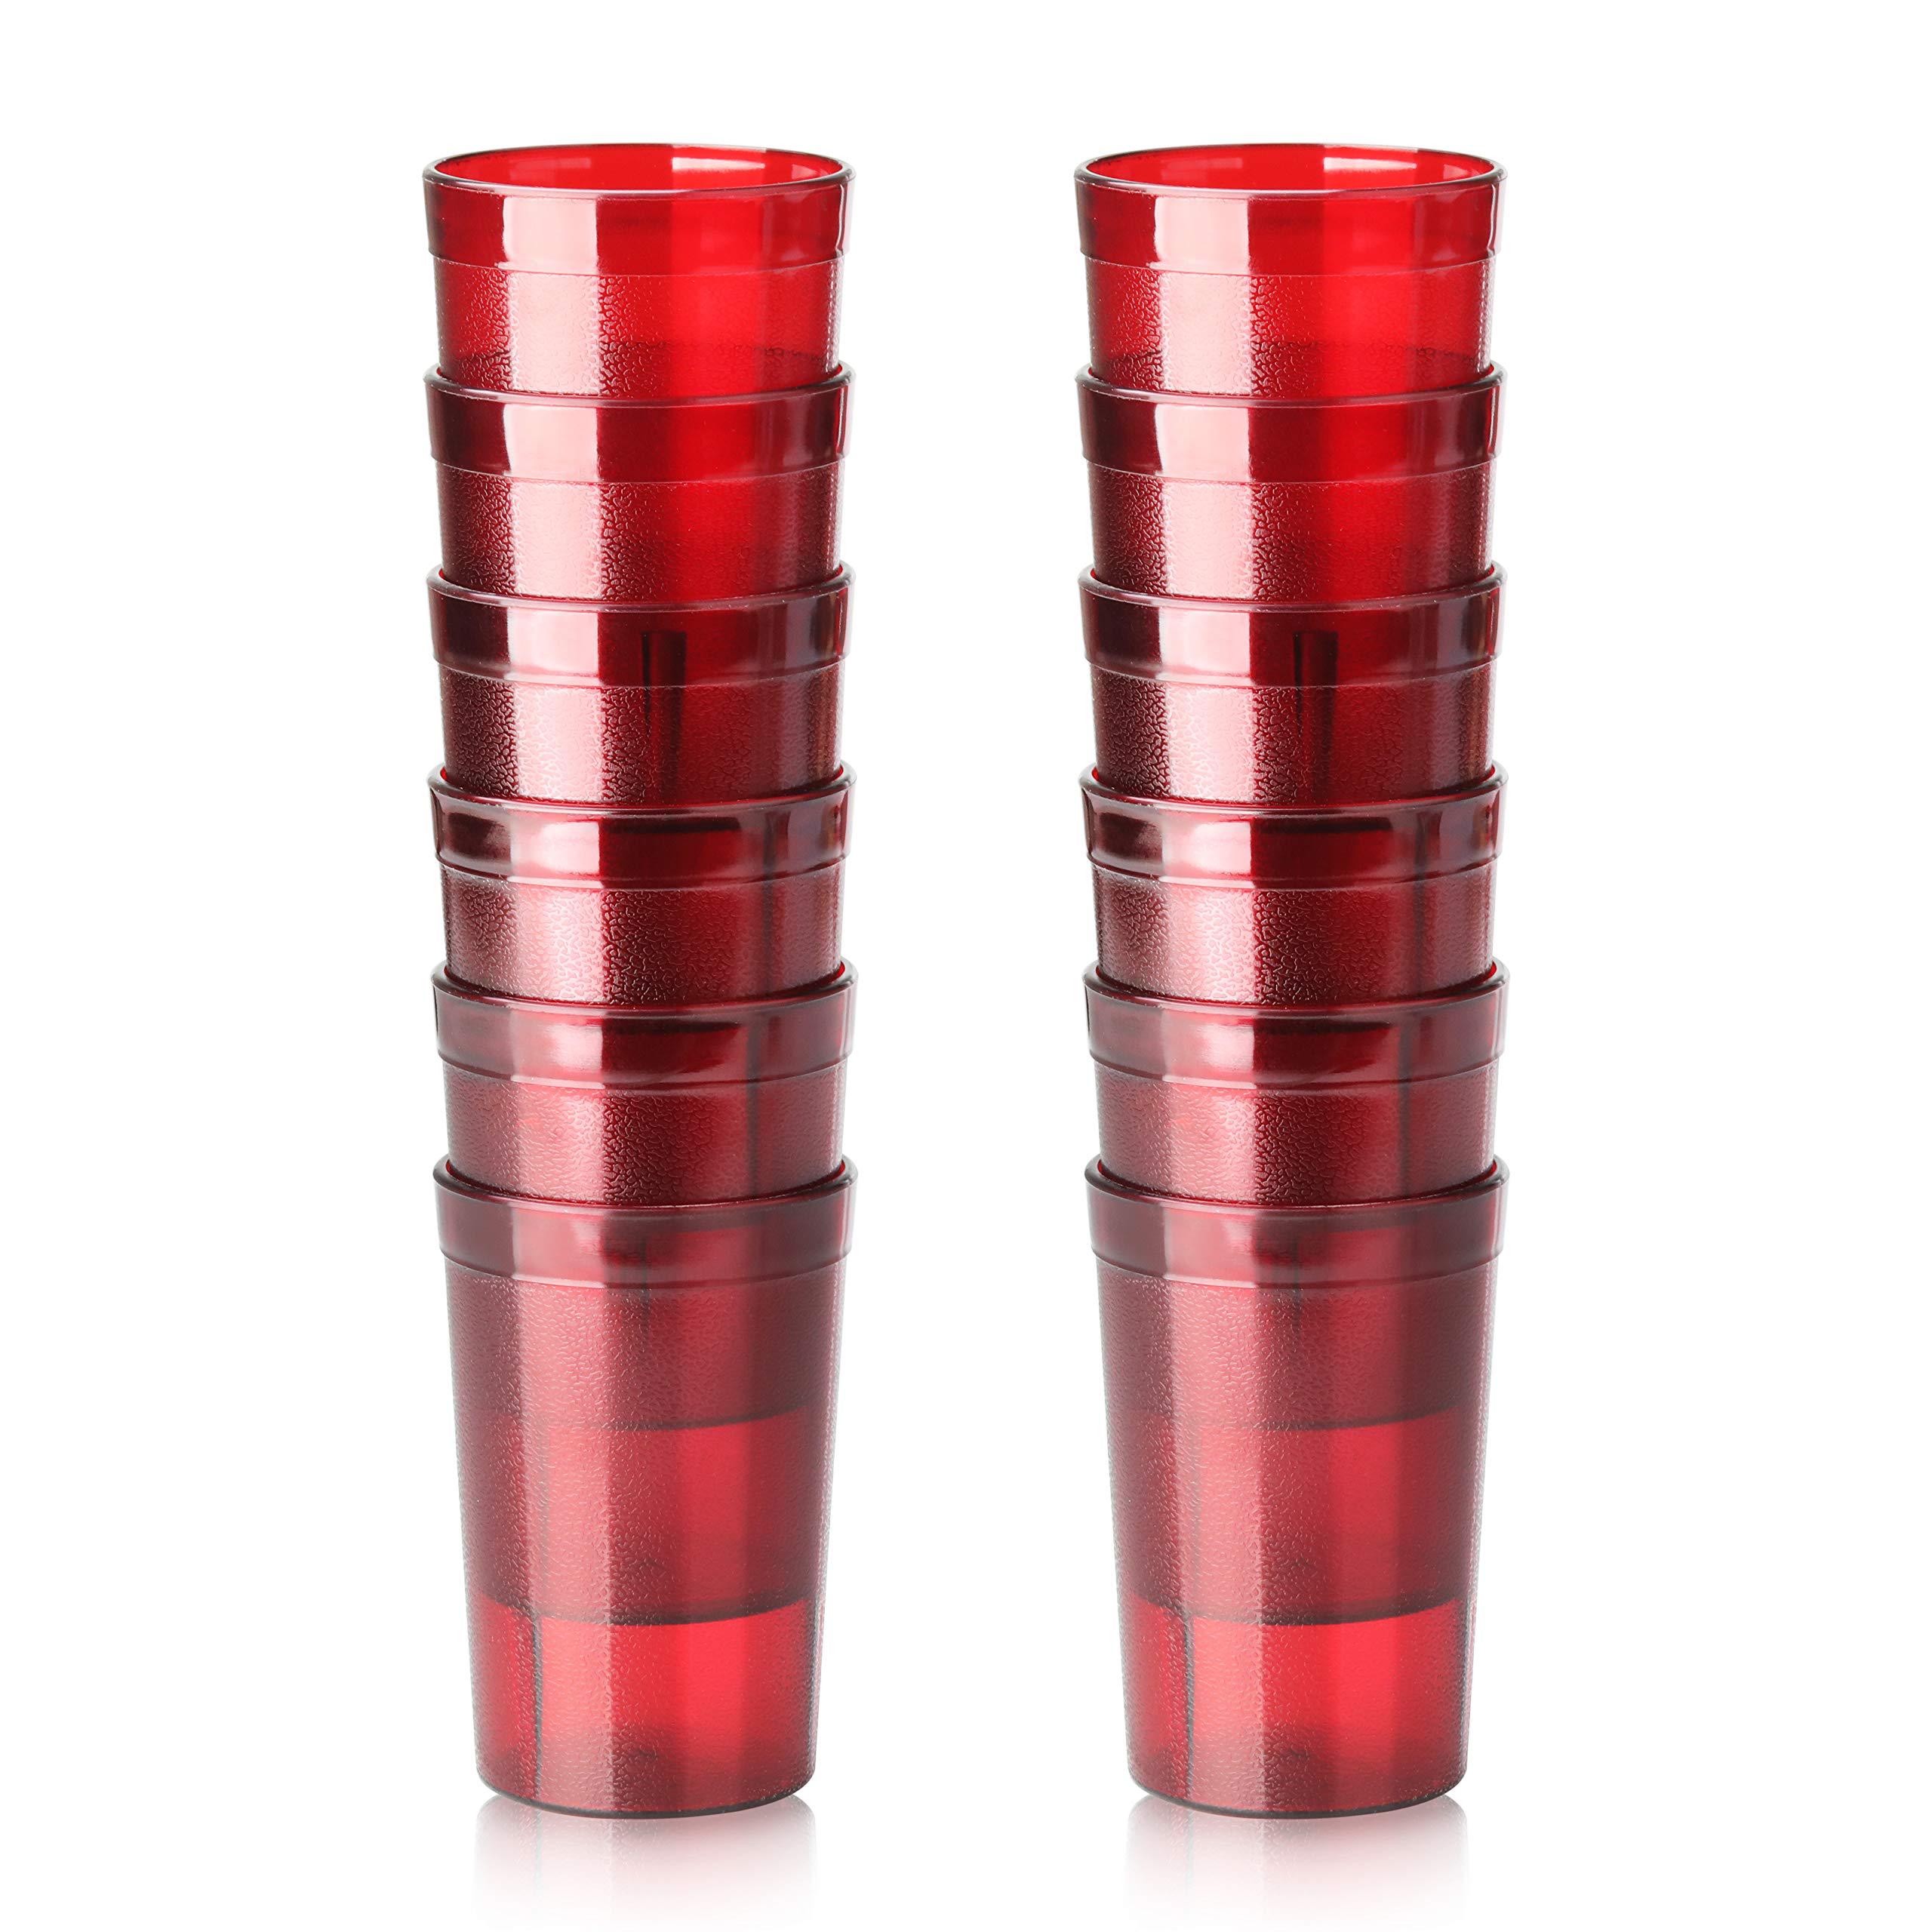 new star foodservice 530196 tumbler beverage cup, stackable cups, break-resistant commercial san plastic, 8 oz, red, set of 1